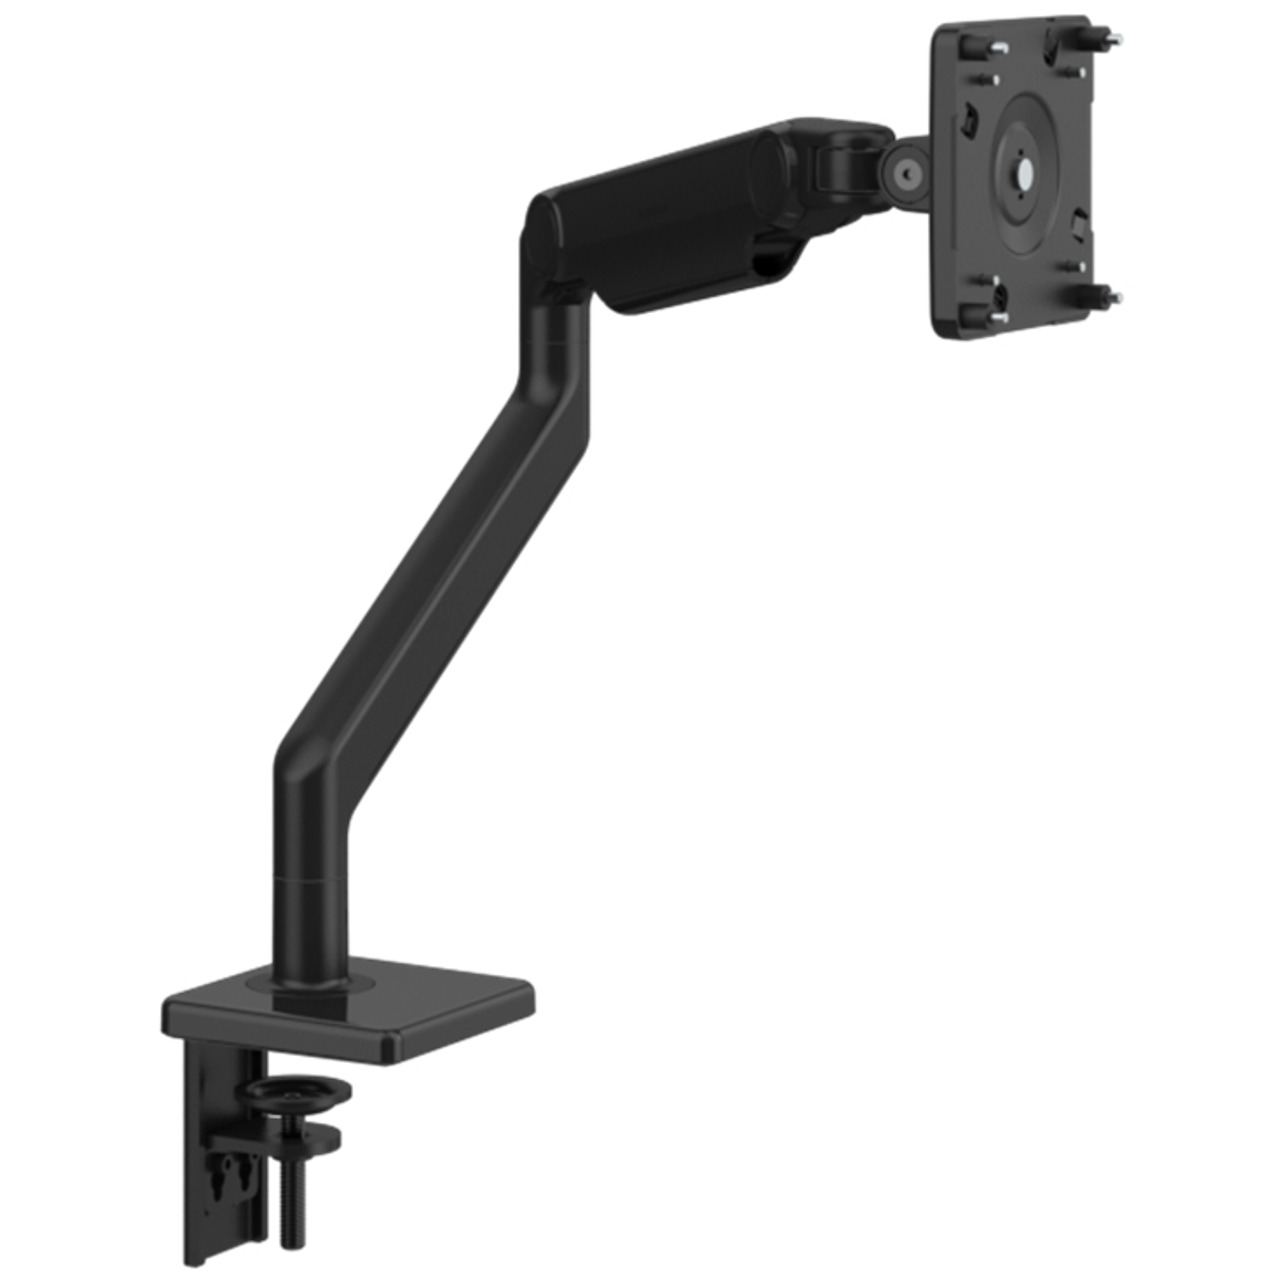 Humanscale M21CMSBTB 2.1 Mounting Kit Adjustable Arm for LCD Display-Black